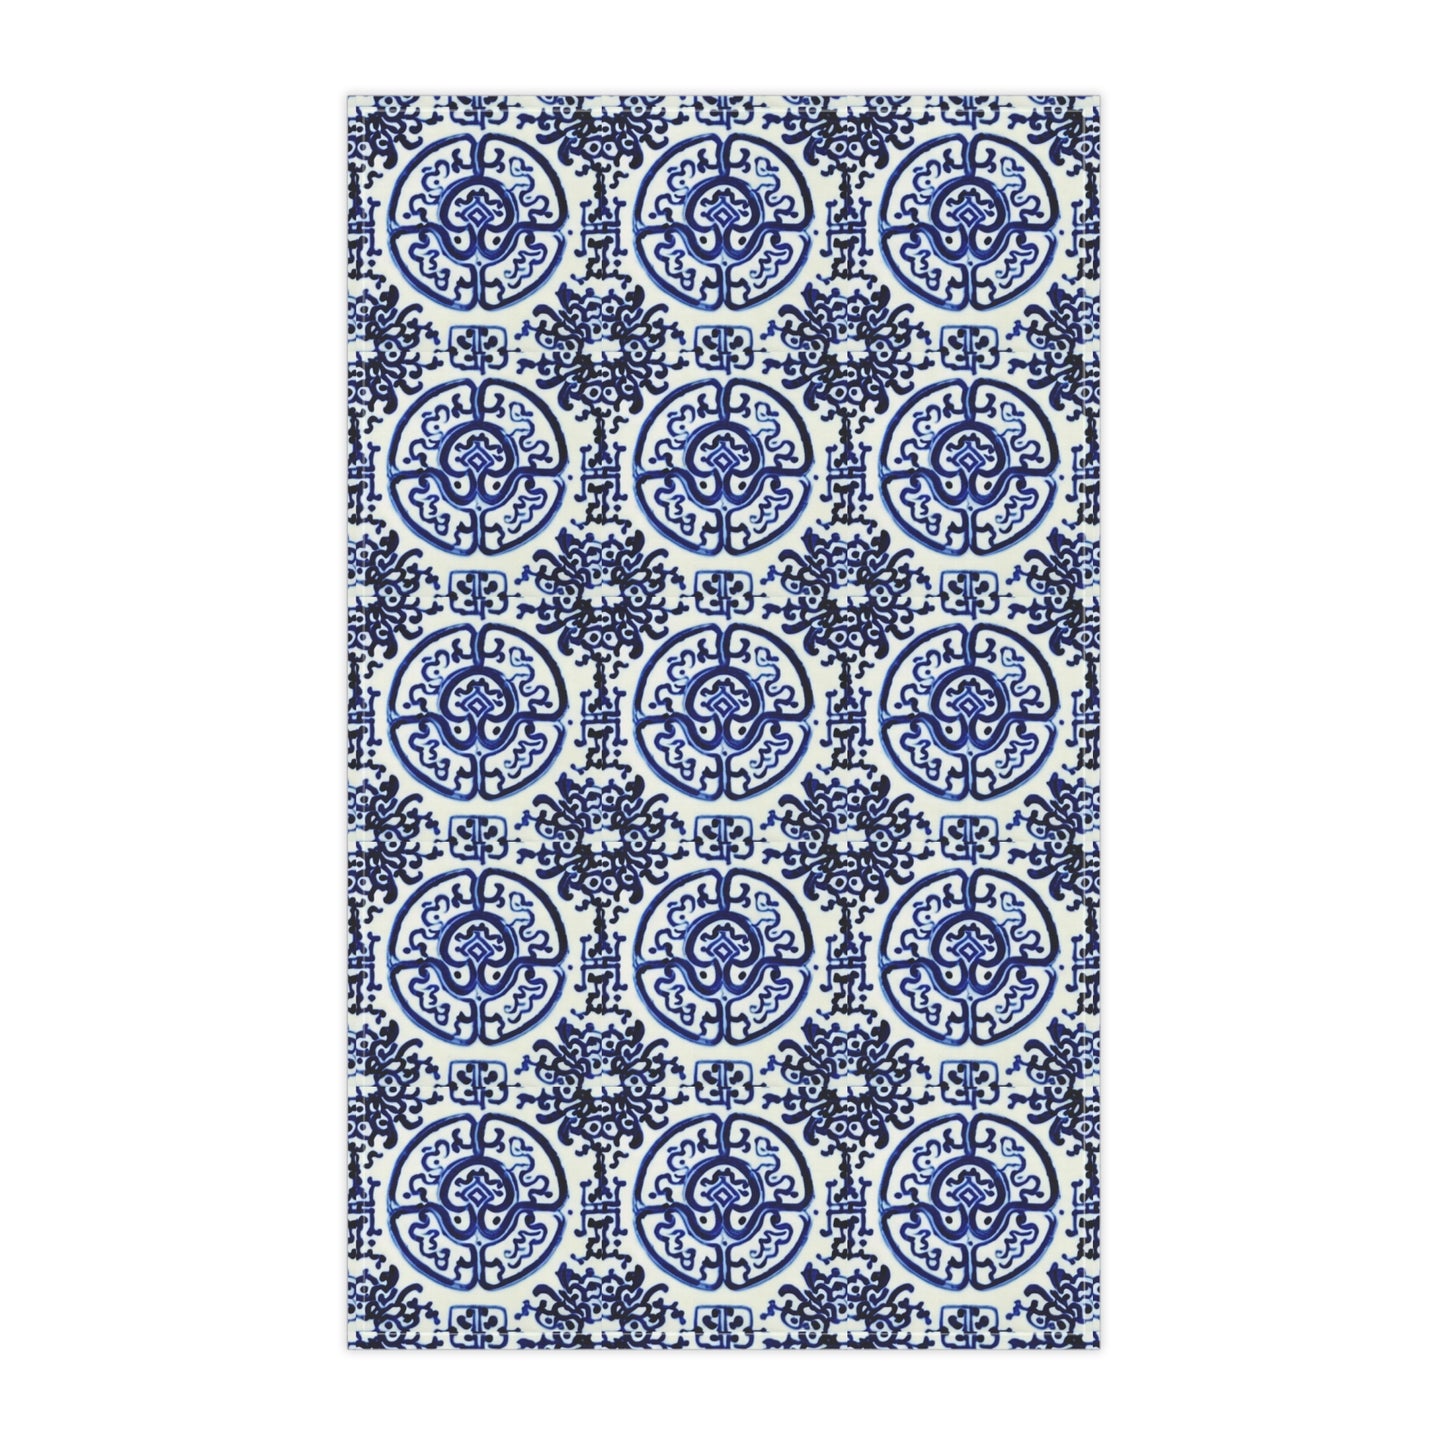 Chinese Symbol Decorative Pattern Ming Dynasty Blue and White Decorative Kitchen Tea Towel/Bar Towel